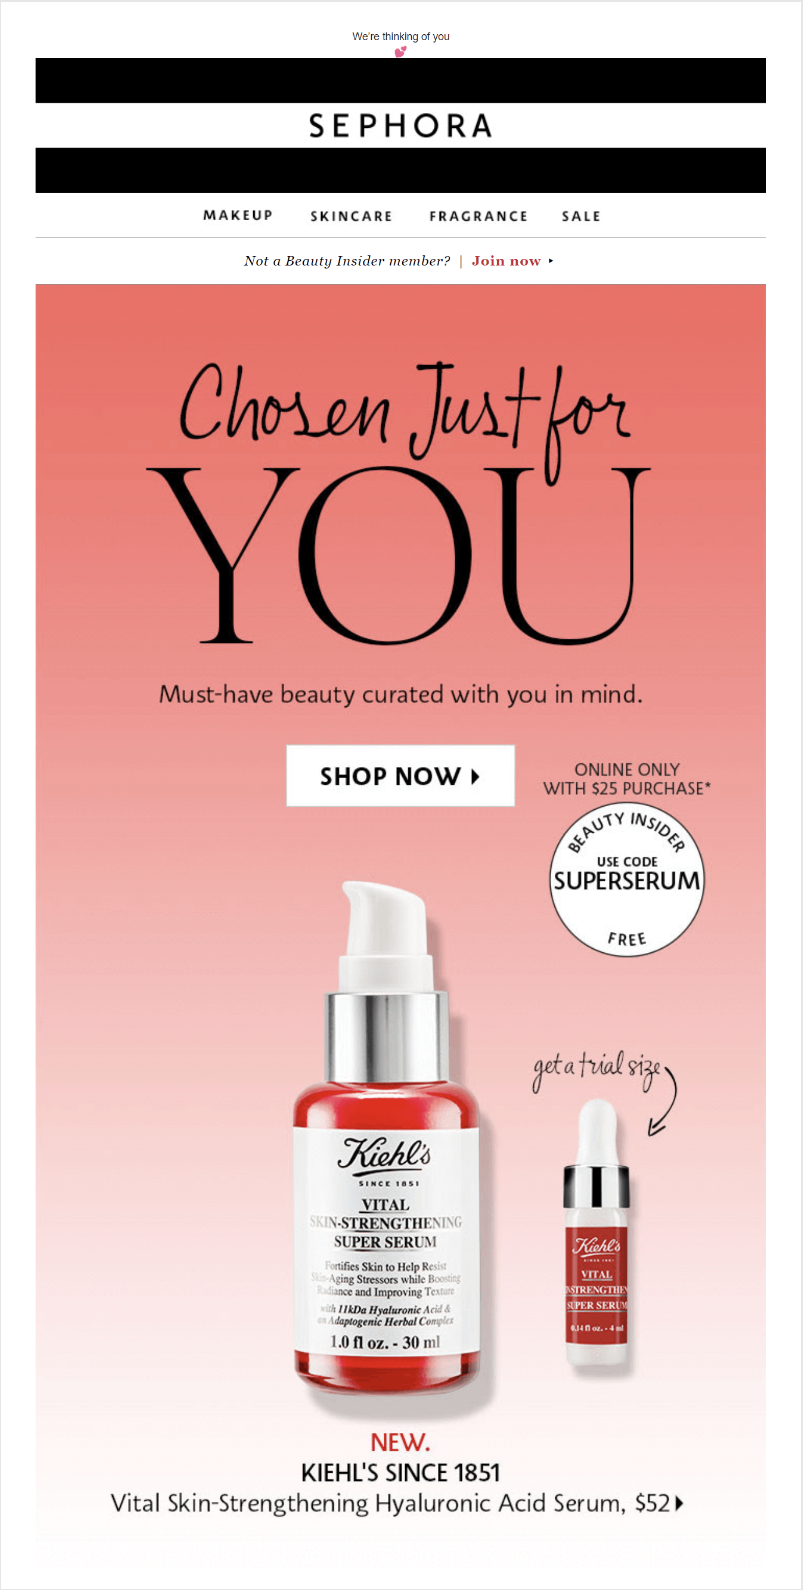 Sephora personalized product recommendations